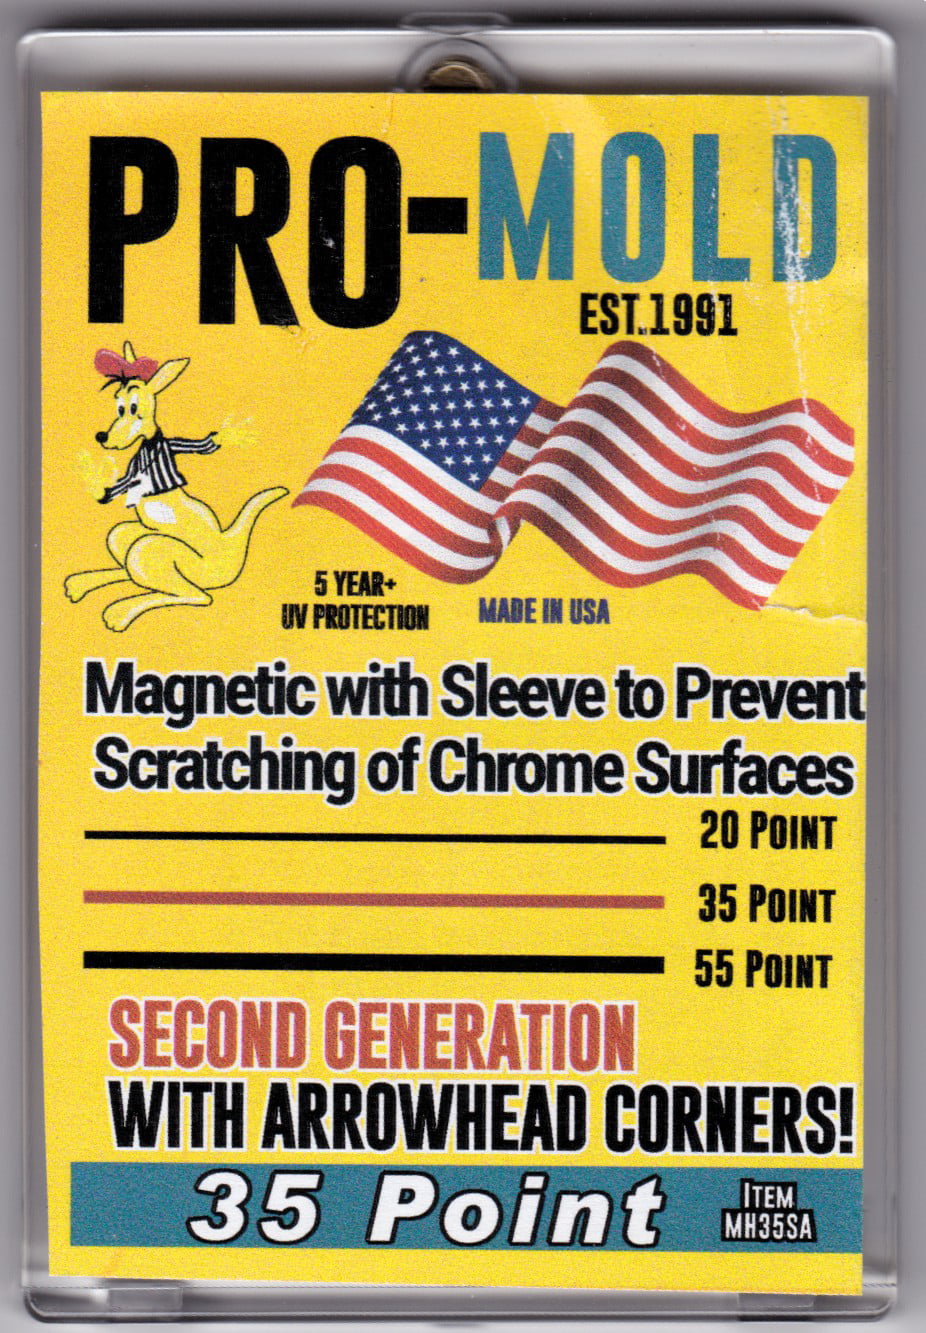 25 NEW Pro-Mold PC-STAND Black Trading Card Buisness Card Stands promold pcstand 